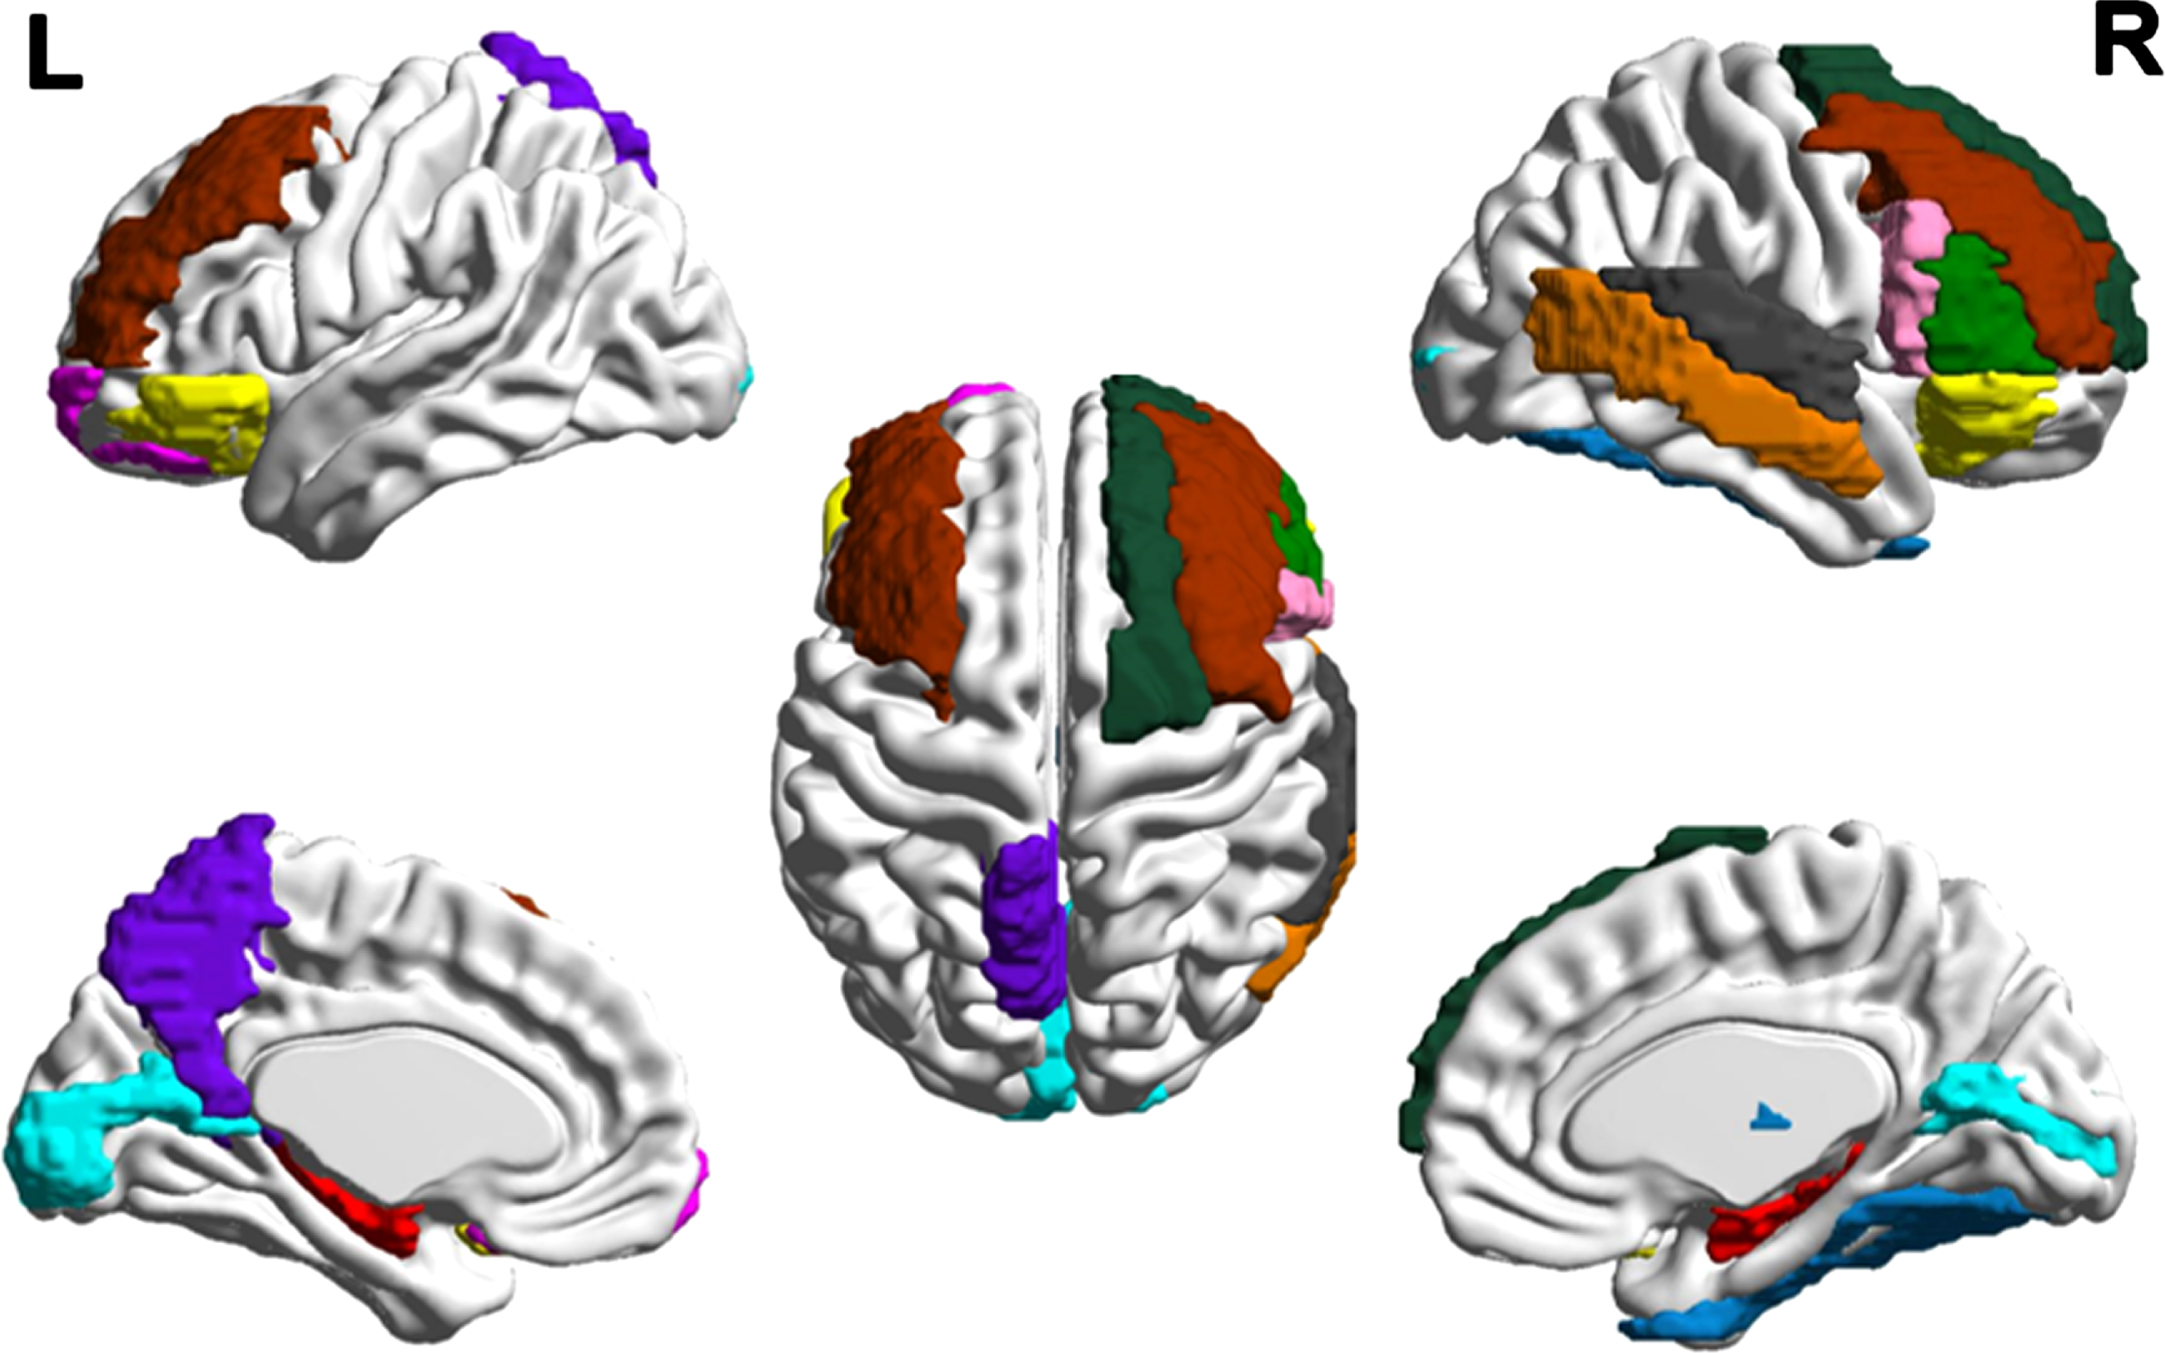 Distribution of cortical changes in COPD patients. Compared to the normal controls, cortical atrophy in COPD patients is concentrated in bilateral hippocampus (red), right opercular part (pink)/triangular part of the inferior frontal gyrus (green), left precuneus (purple), bilateral middle frontal gyrus (brown), right thalamus (blue), right superior (gray)/middle temporal gyrus (orange), right superior frontal gyrus (blackish green), bilateral calcarine (cyan), bilateral orbital inferior frontal gyrus (yellow), left orbital superior frontal gyrus (magenta), and right fusiform gyrus (indigo). Compared with the dominant hemispheres, the structural changes in the non-dominant hemispheres were more obvious. The lesions in the frontal lobe are prominent.